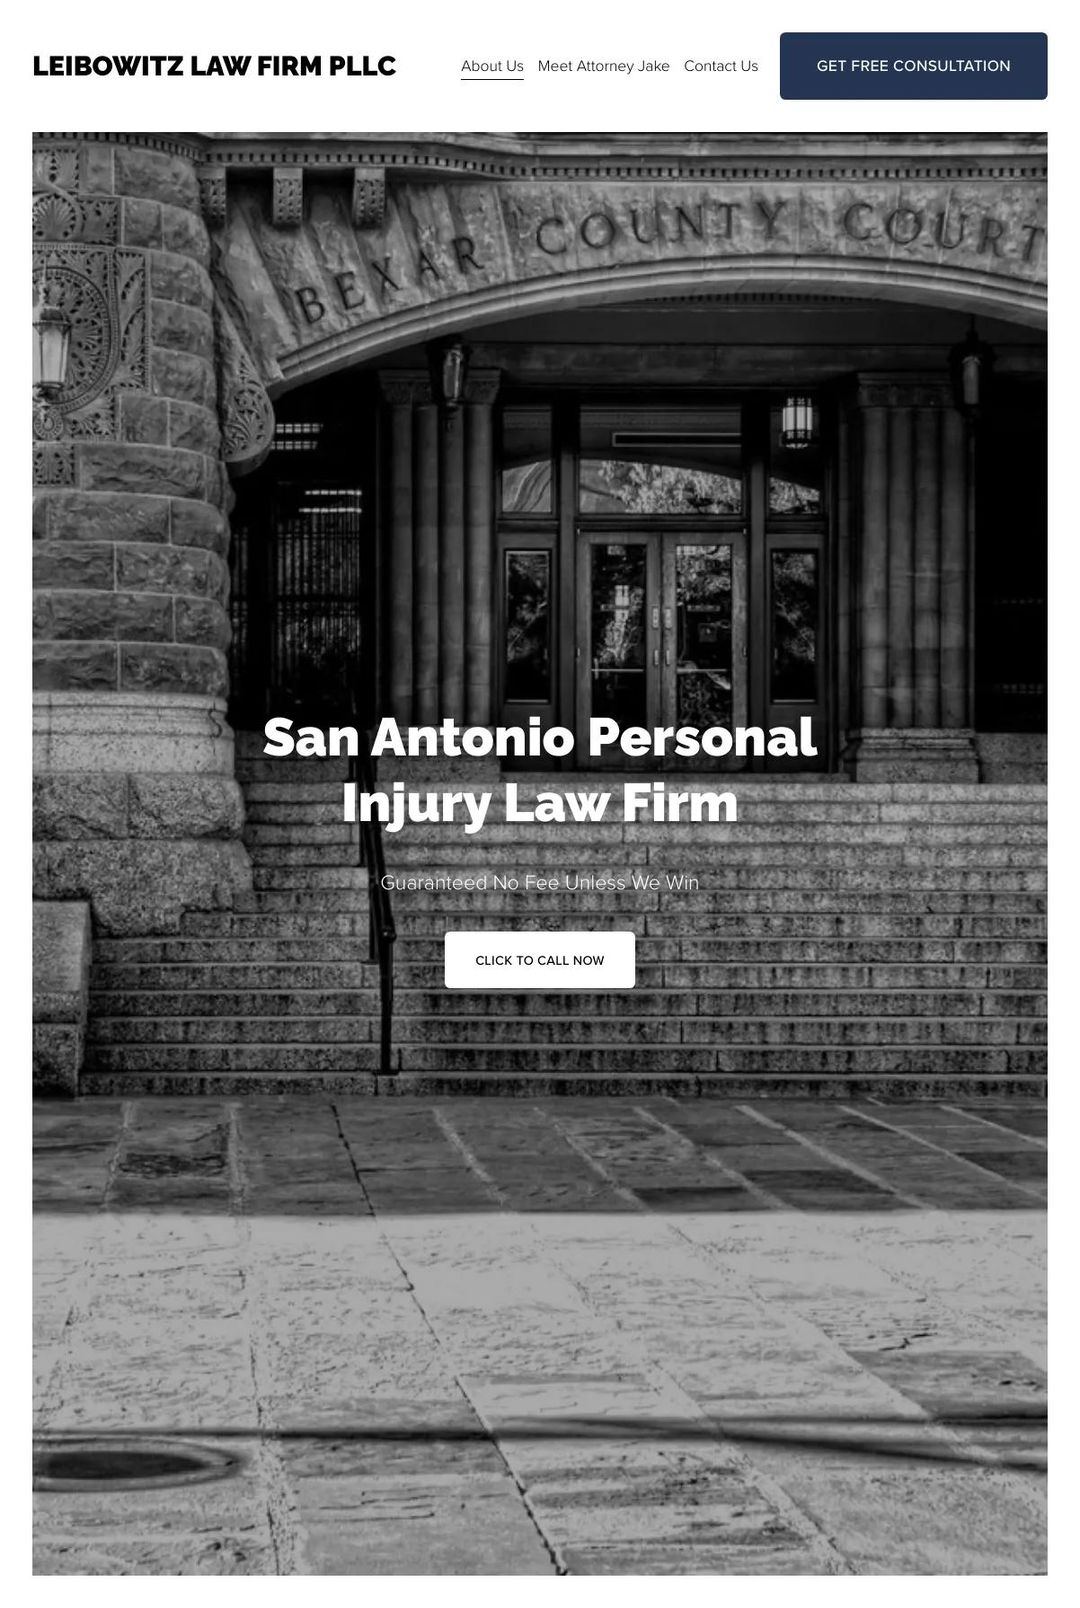 Screenshot 1 of Leibowitz Law Firm PLLC (Example Squarespace Law Firm Website)